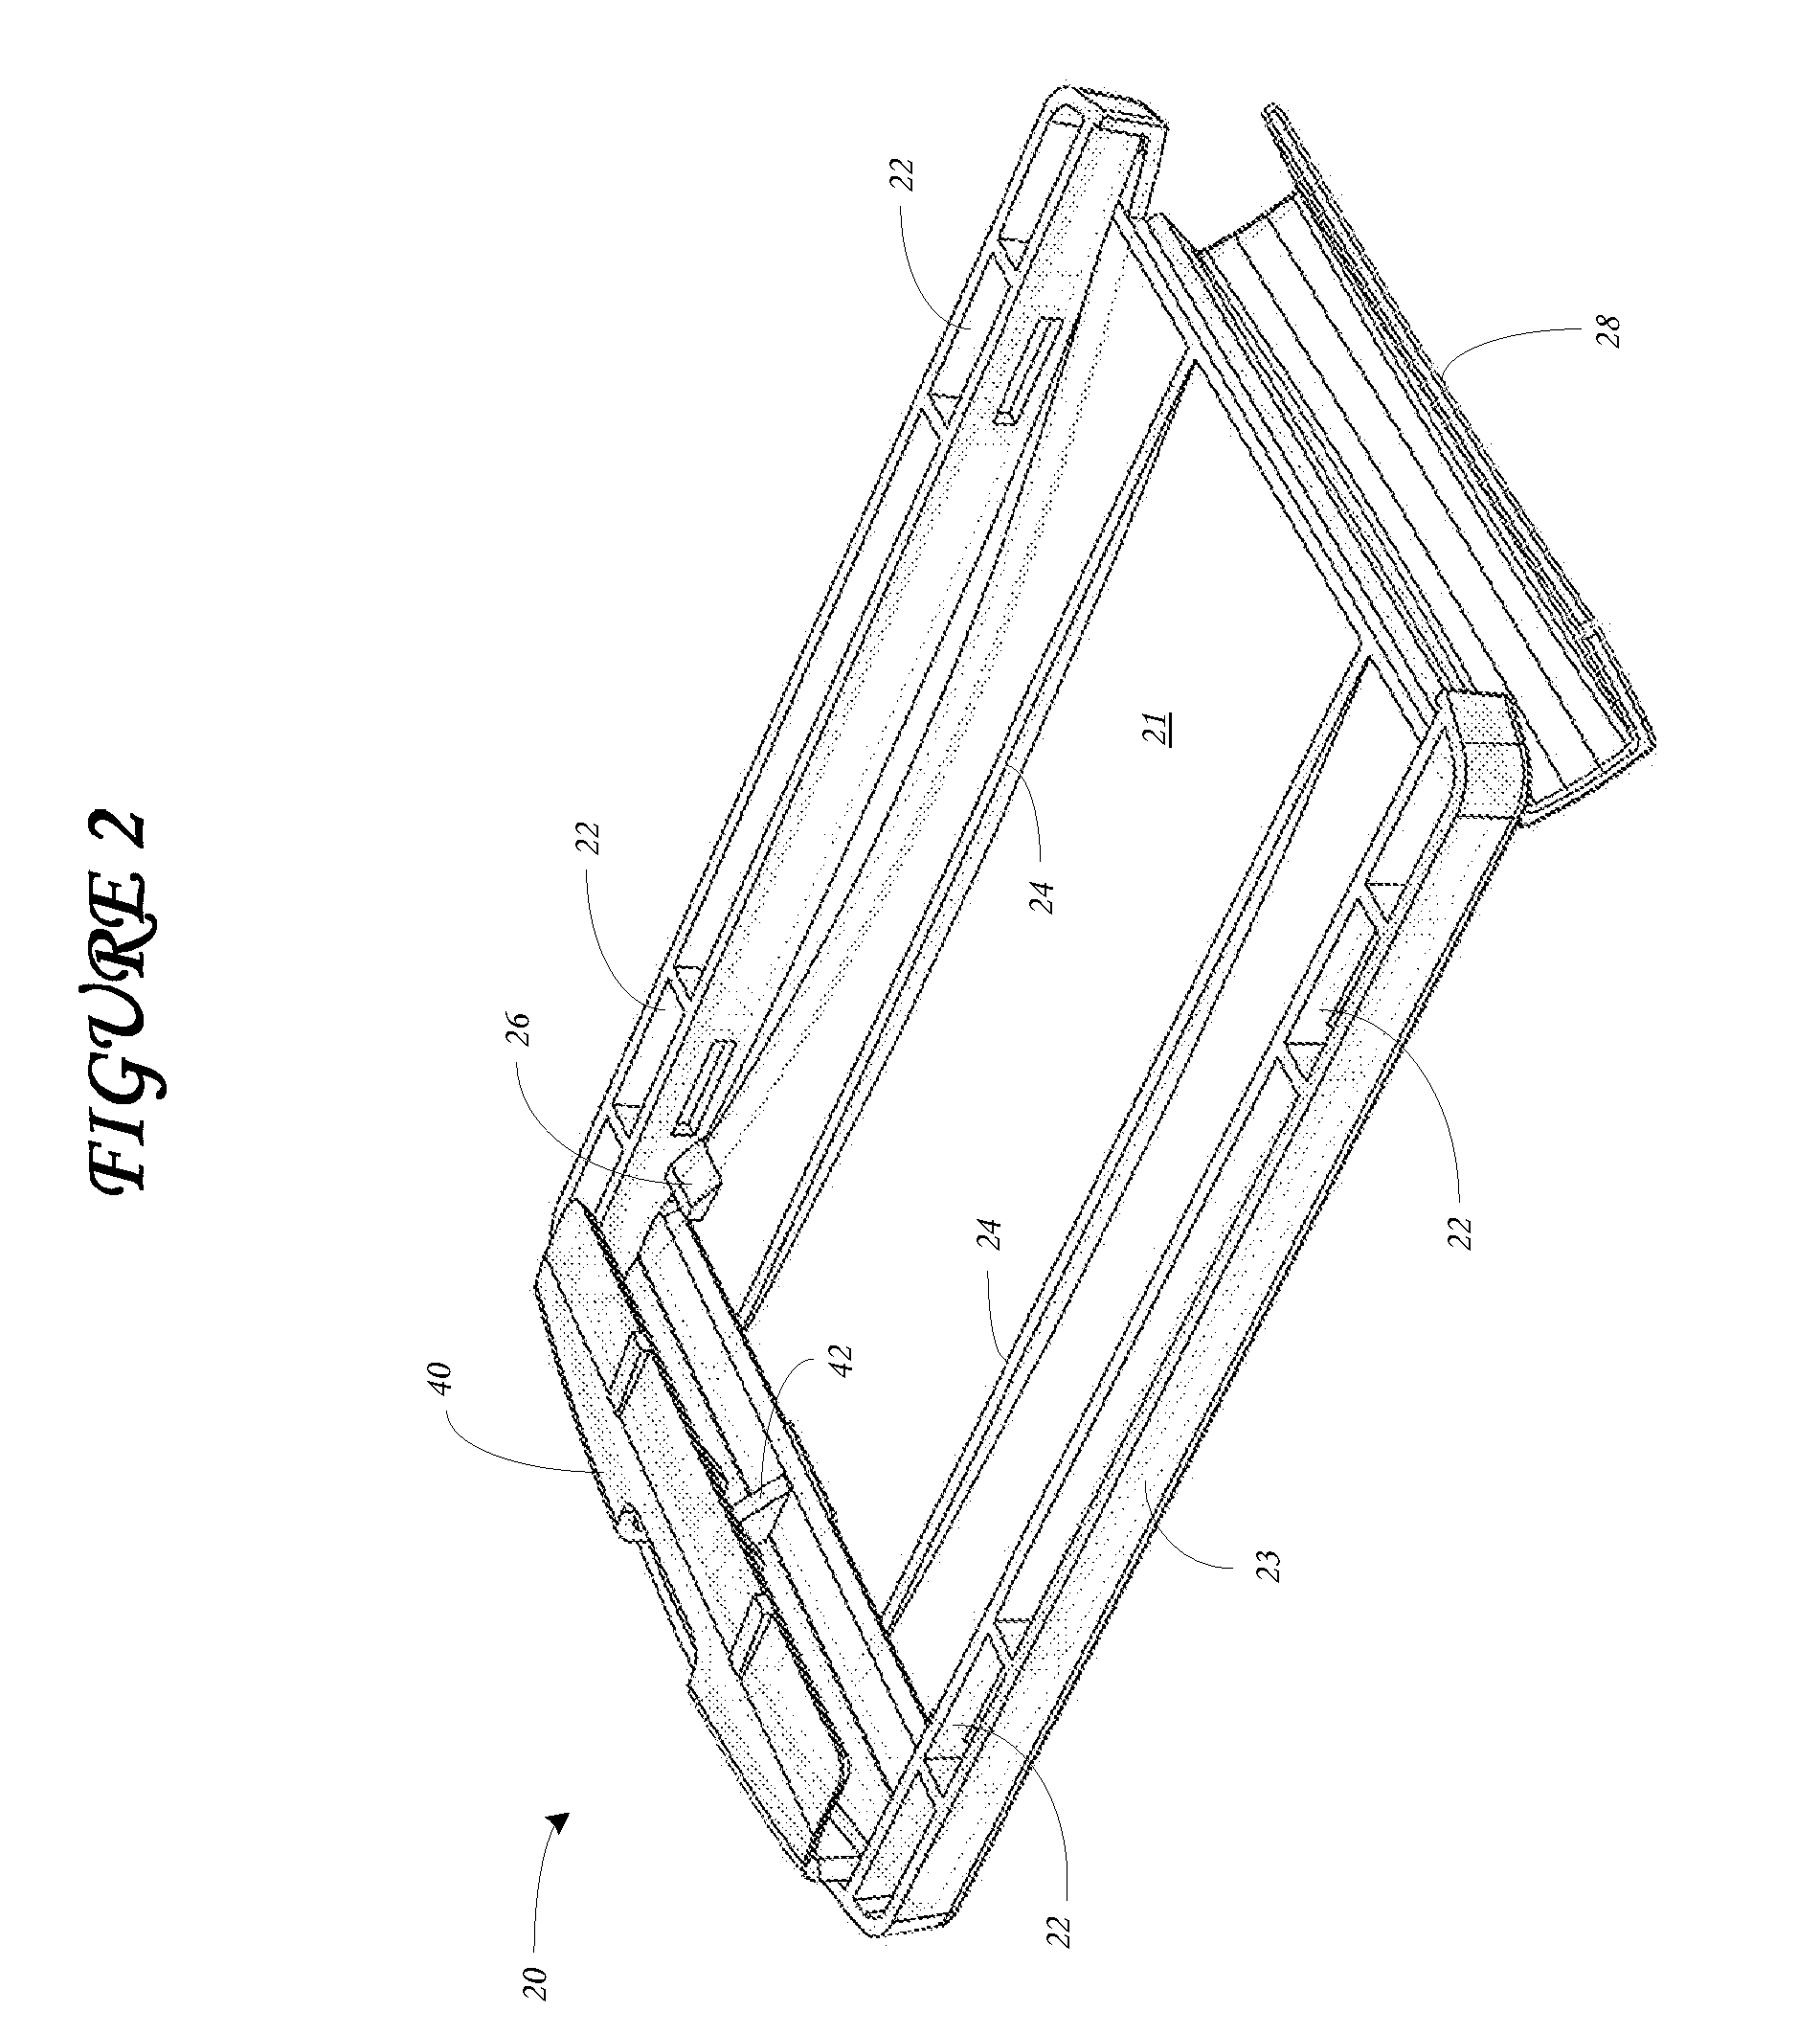 Child resistant packaging system